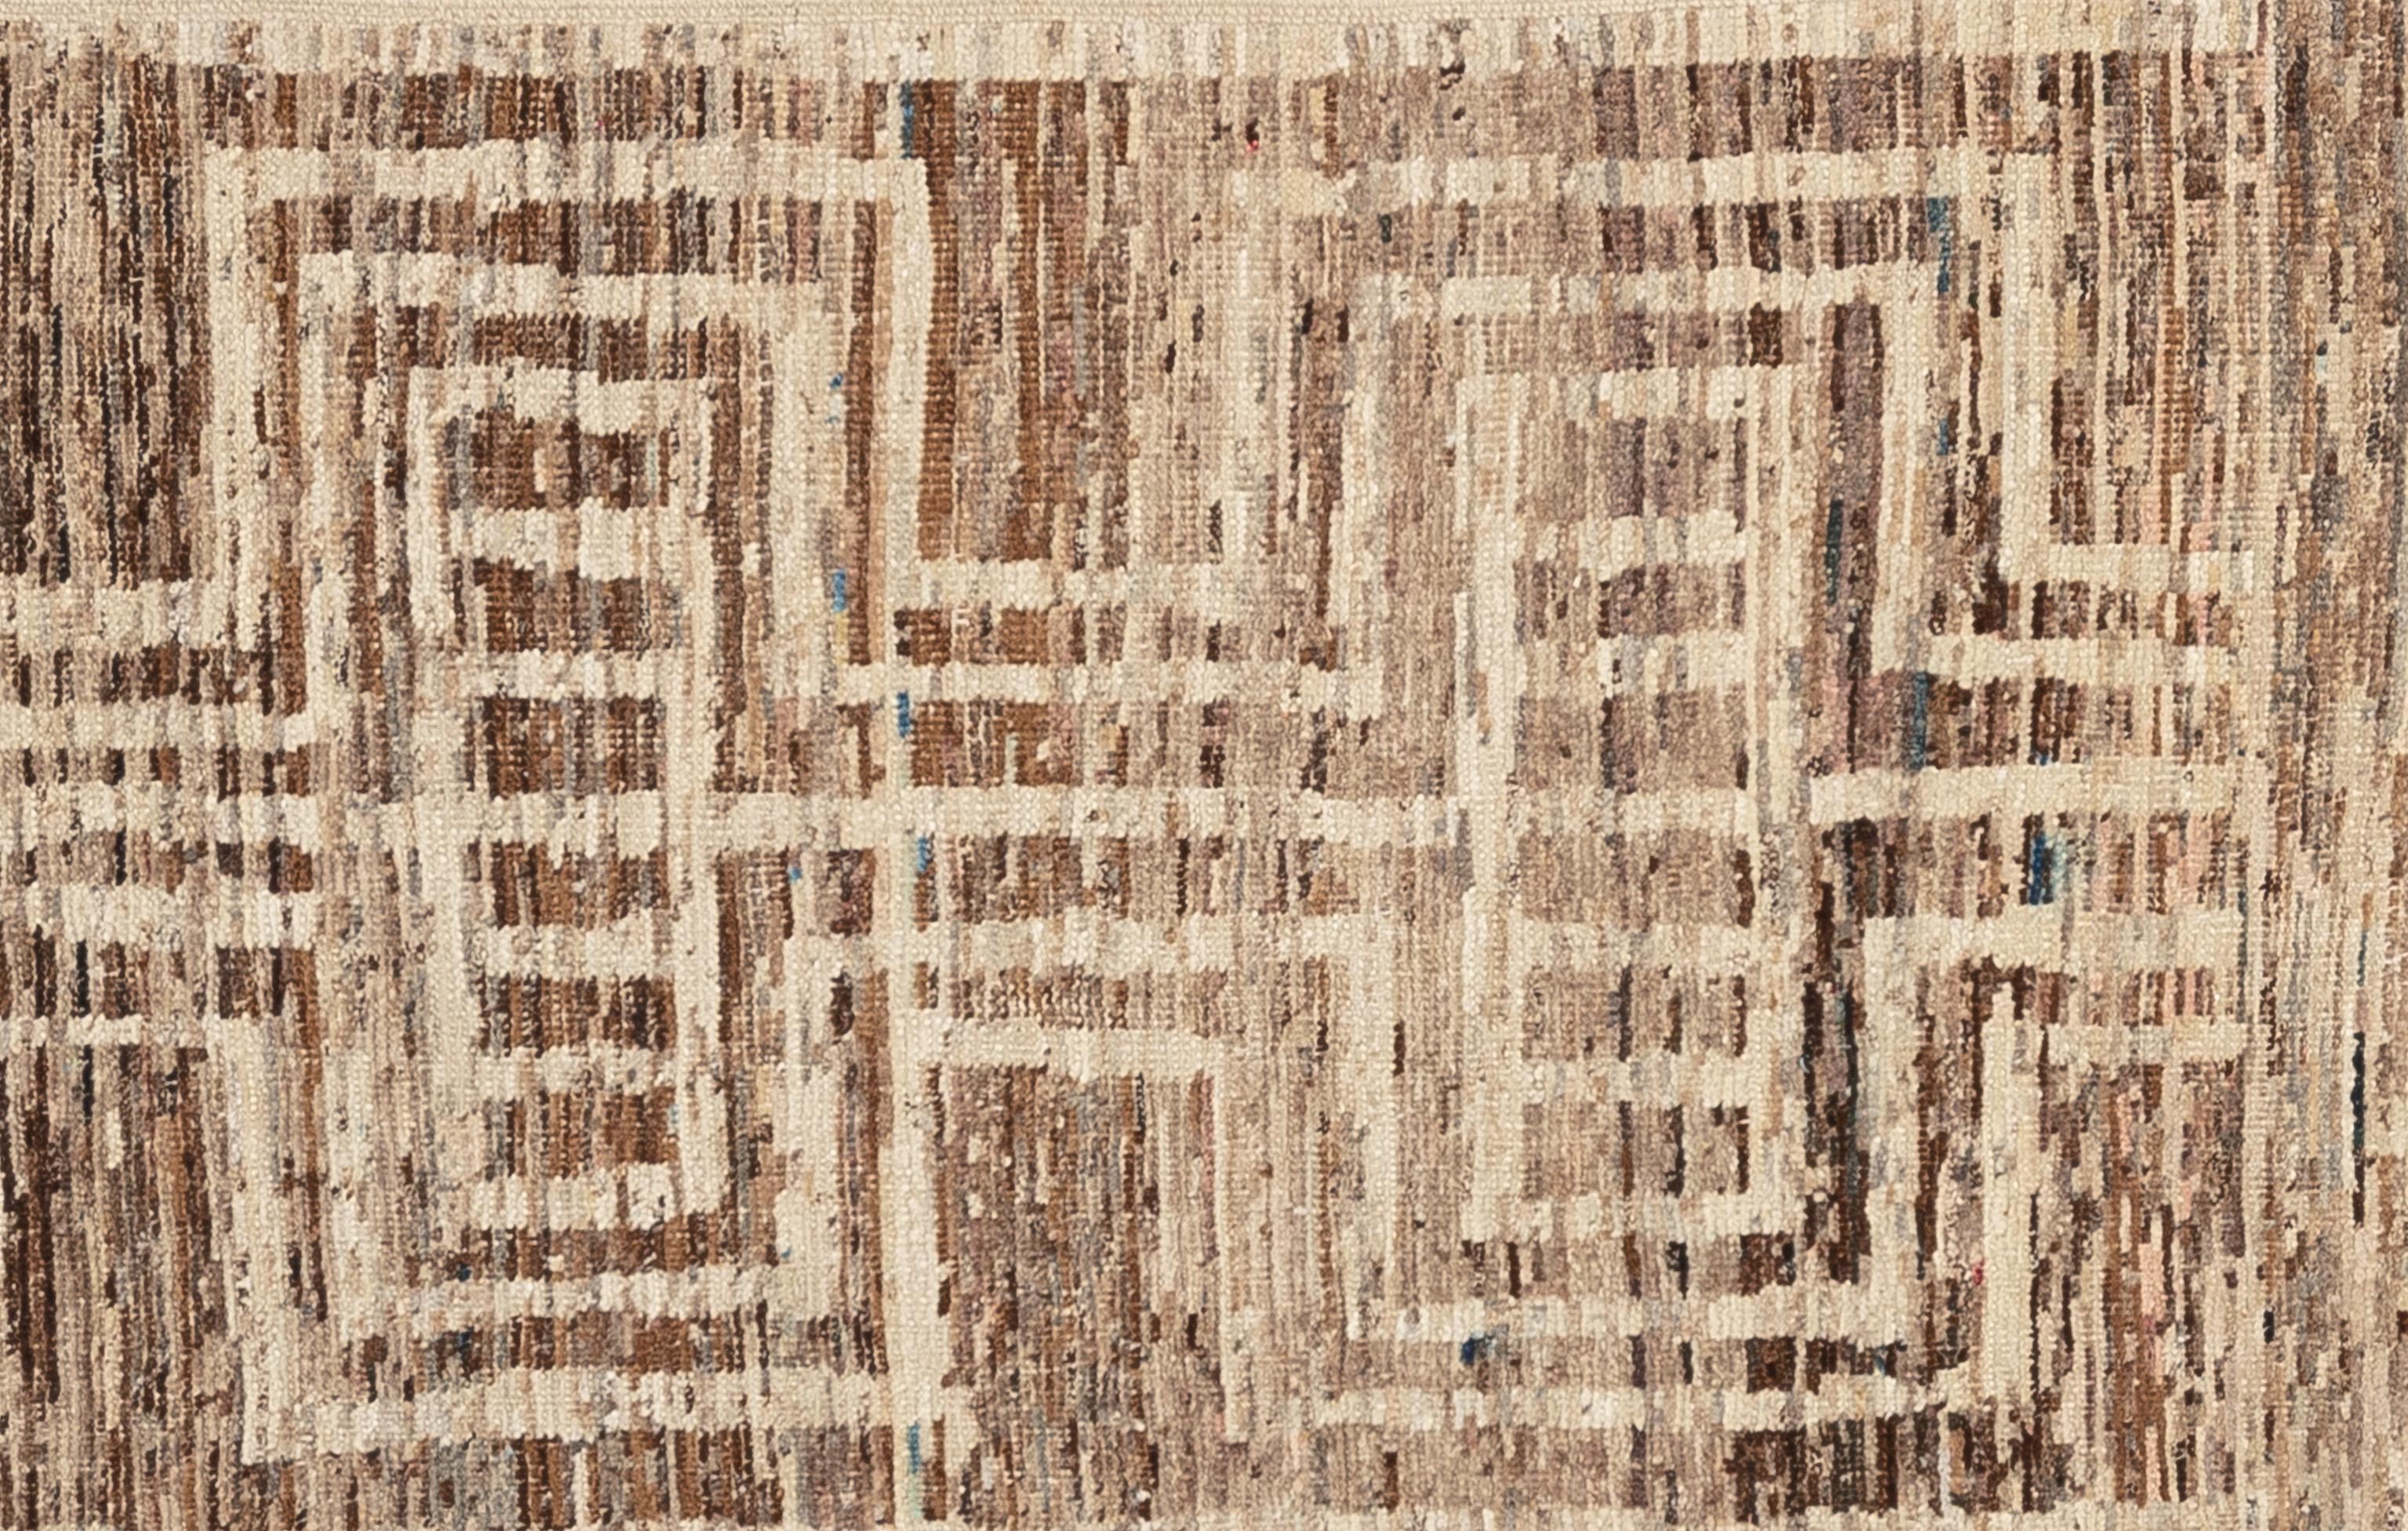 Handwoven with 100% handspun wool, in the mountains of Afghanistan; this beautiful naturally dyed Moroccan rug is truly one-of-a-kind. Moroccan rugs tend to be simple and are the perfect compliment for your décor. From minimalist modern to